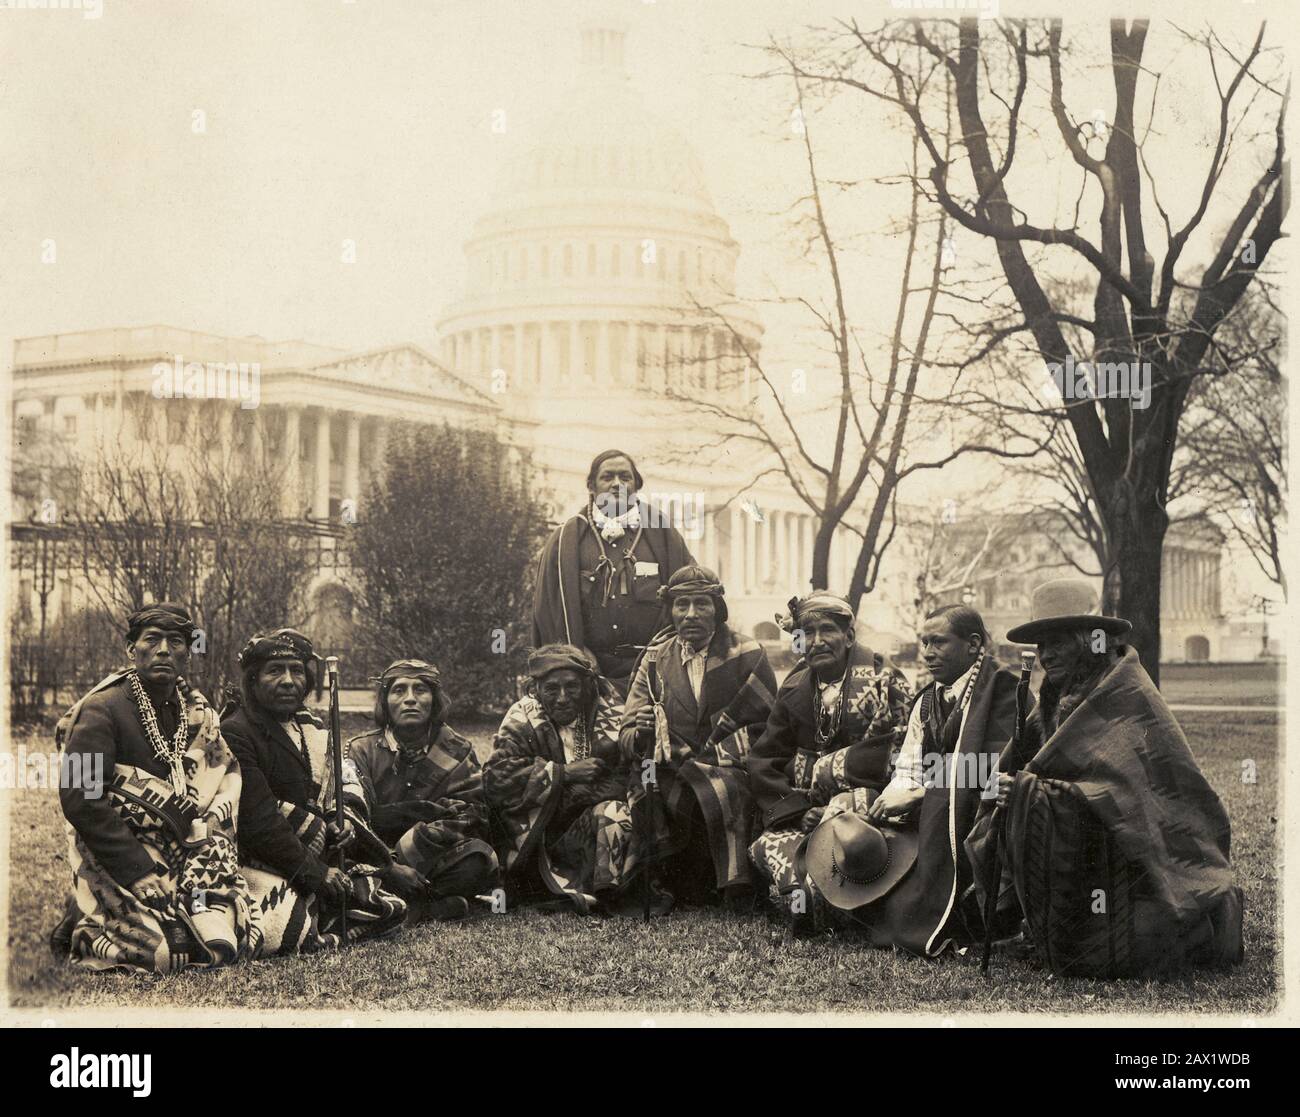 1923 , 15 january , WASHINGTON , DC , USA :Group of Pueblo Indians photographed at the U.S. Capitol today. This is the first time since the Abraham Lincoln Administration that the Pueblo Indians have sent a delegation to Wash. They appeared before the Senate Lands Committee  - Stati Uniti -  USA - ritratto - portrait  - Abramo - INDIANI INDIANO D' AMERICA - pellerossa - Capitol - Campidoglio ----  Archivio GBB Stock Photo